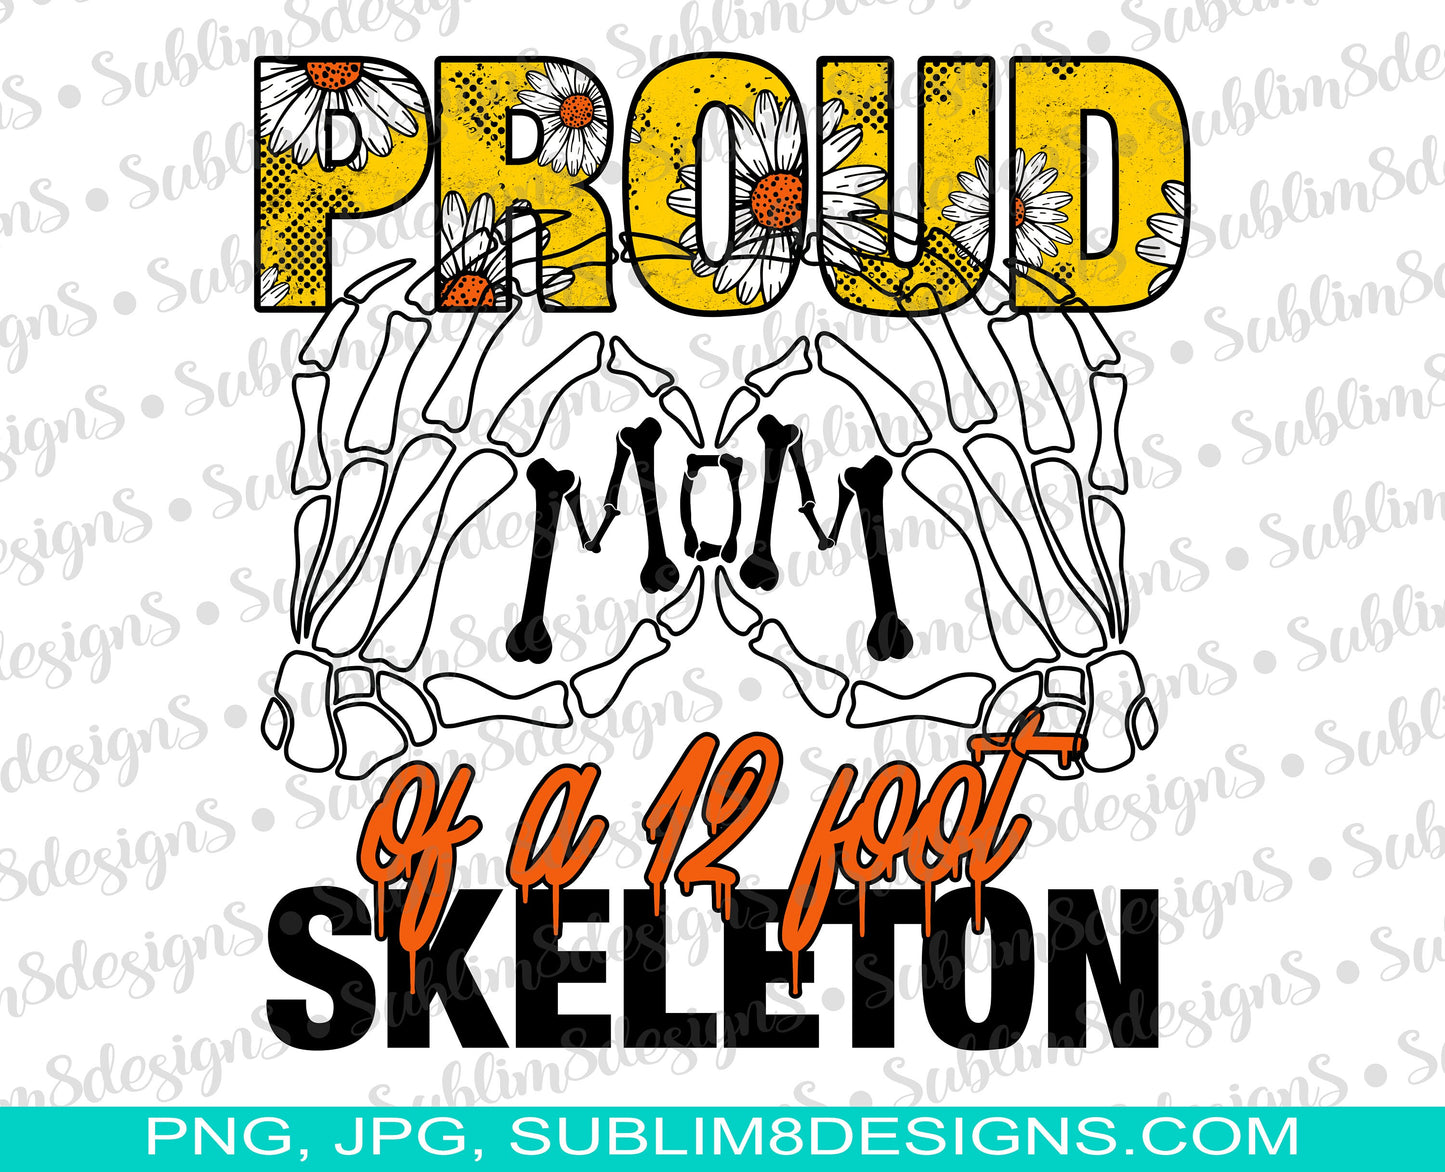 Proud Mom Of A 12 Foot Skeleton PNG and JPG ONLY